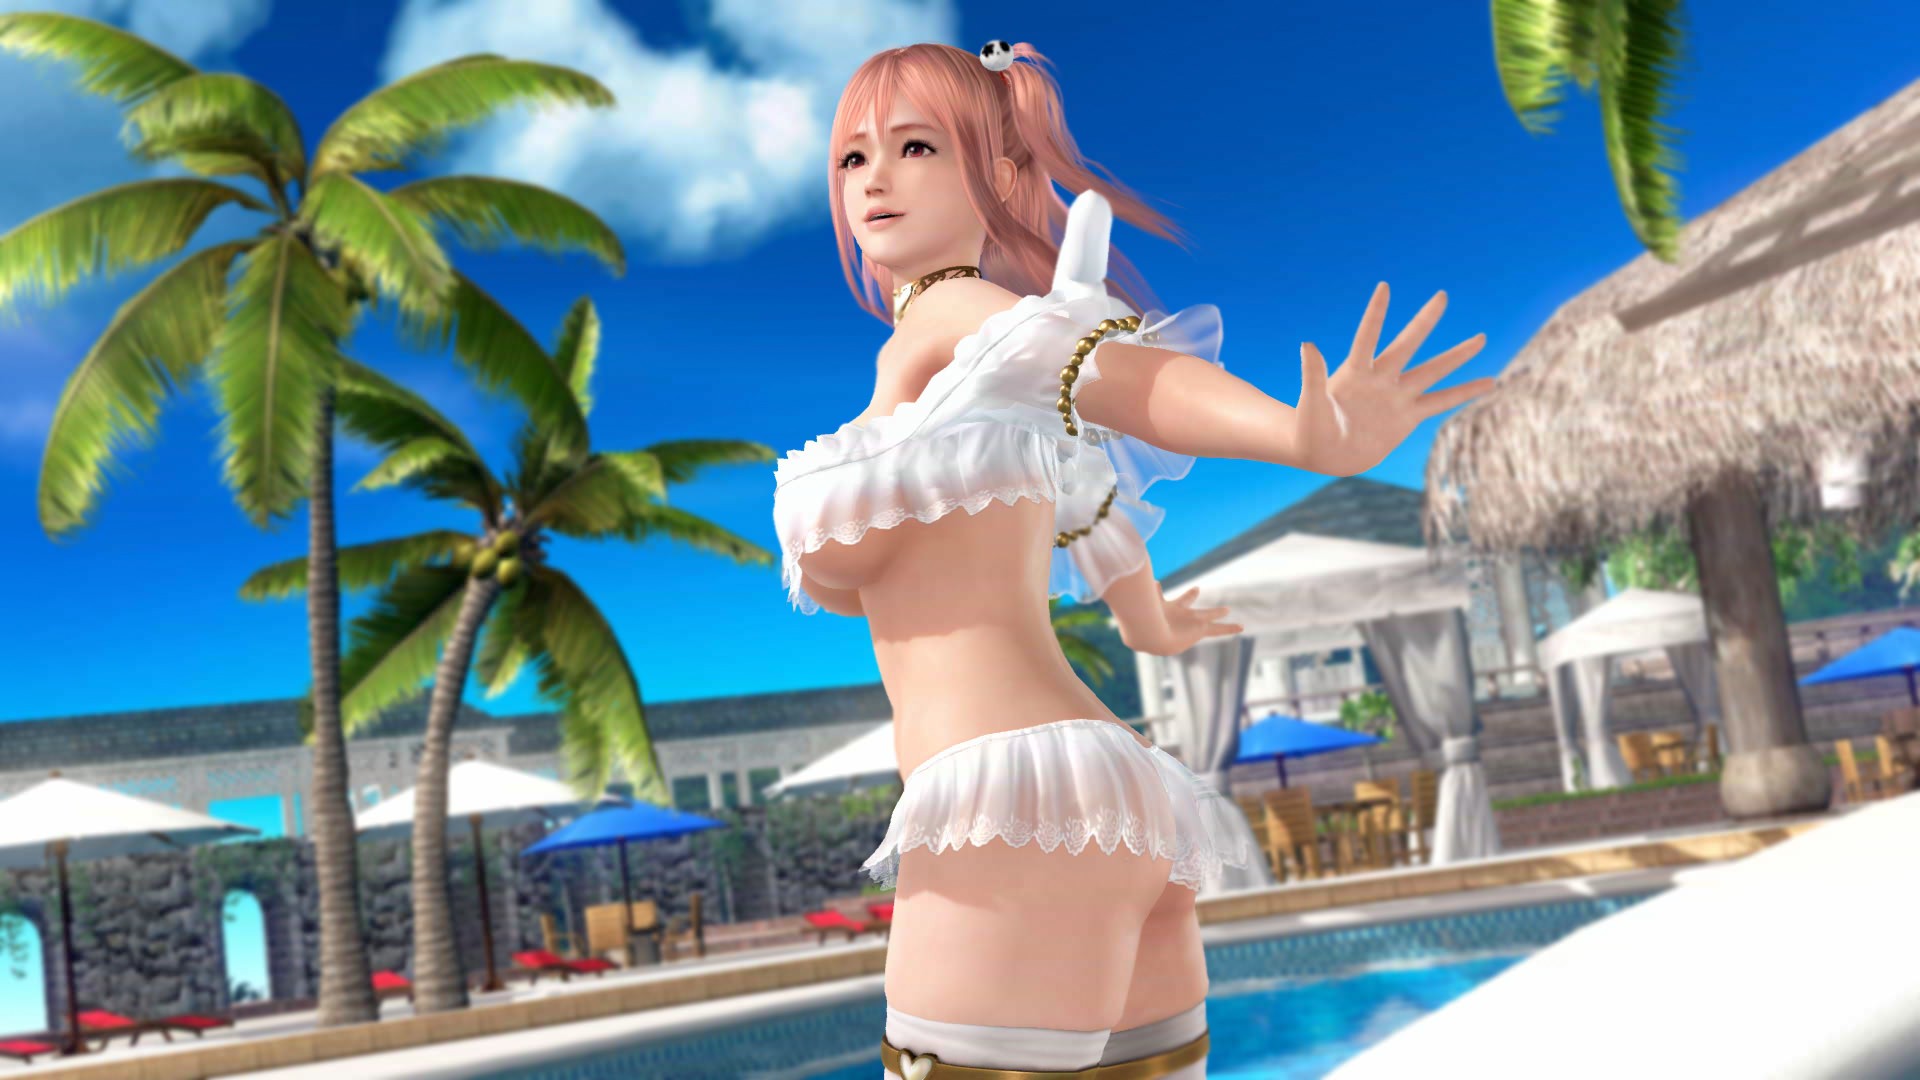 Game is game 18. Игра Dead or Alive Xtreme 3. Хонока игры Dead or Alive. Dead or Alive Xtreme 3 Honoka. Honoka 3 (Doa) Dead or Alive.